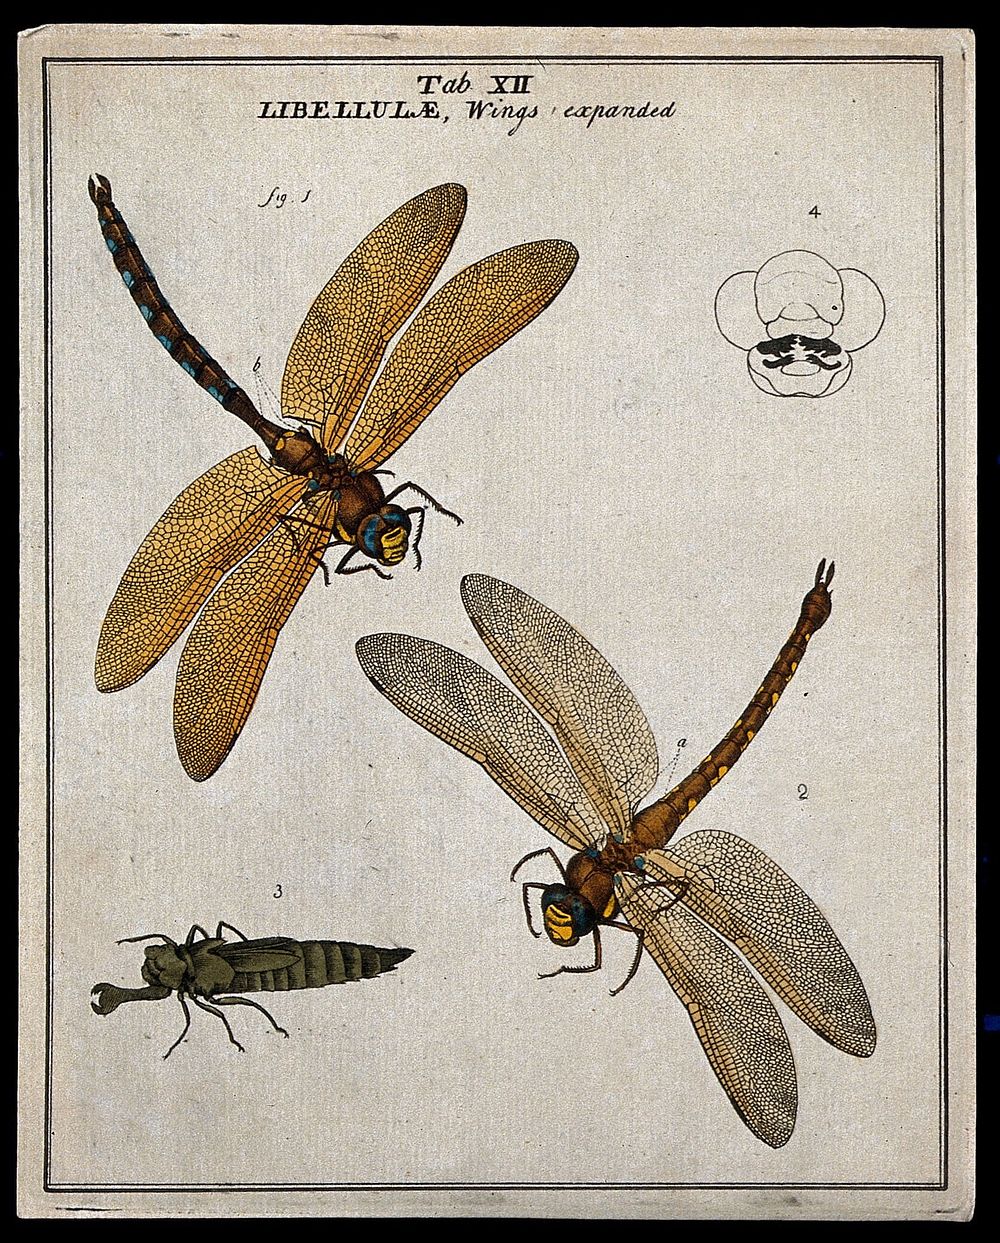 Two dragonflies (Libellulæ species): adults and larva. Coloured etching by M. Harris, ca. 1766.